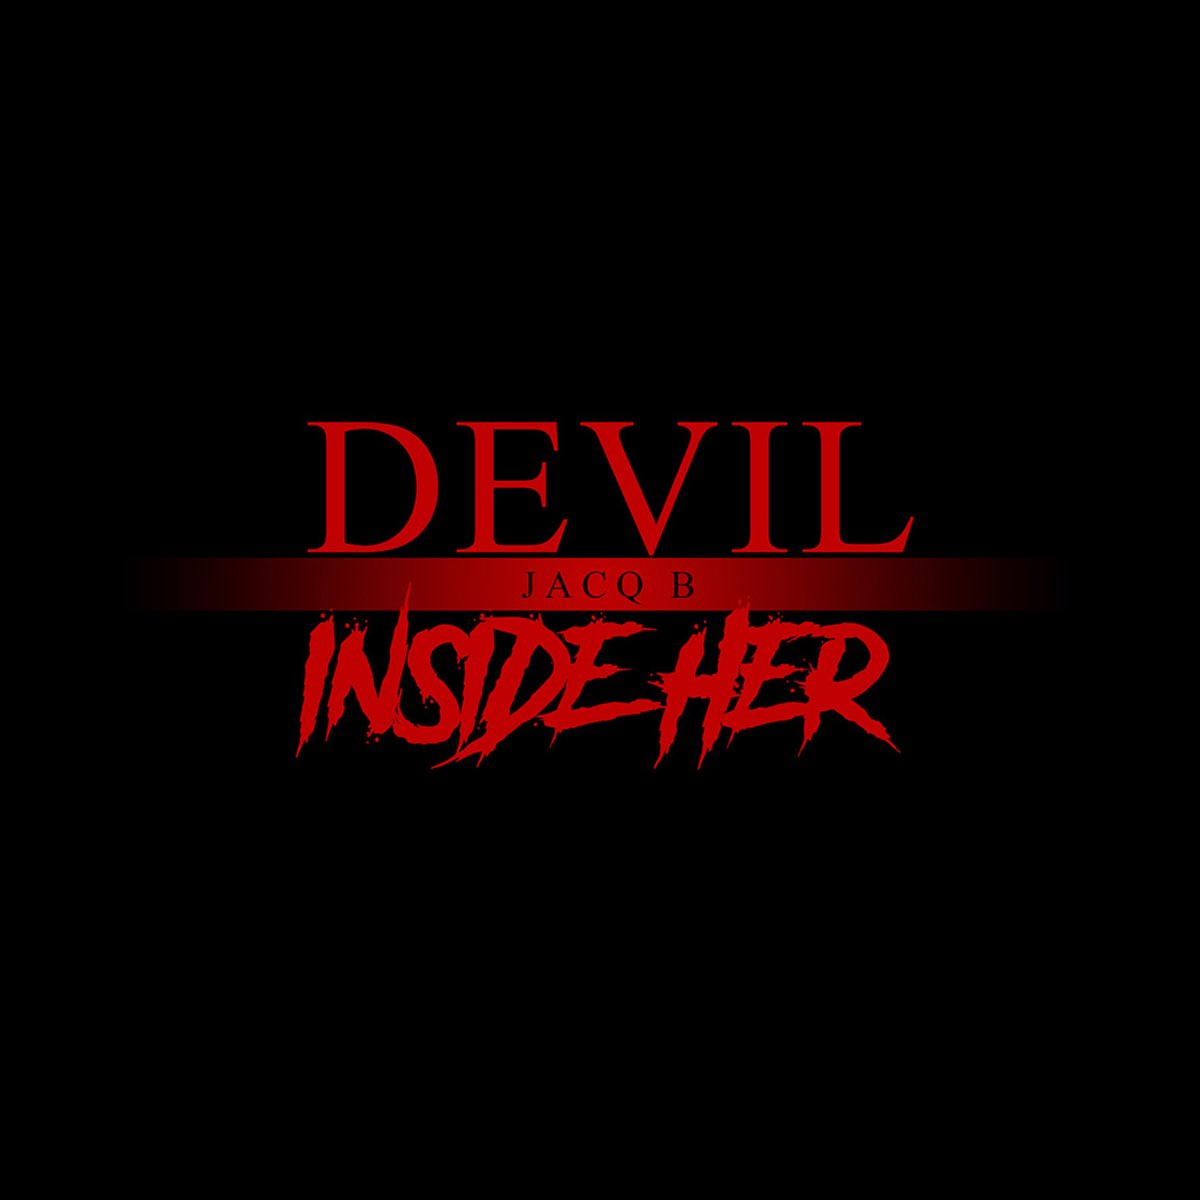 chester cobb recommends the devil inside her pic